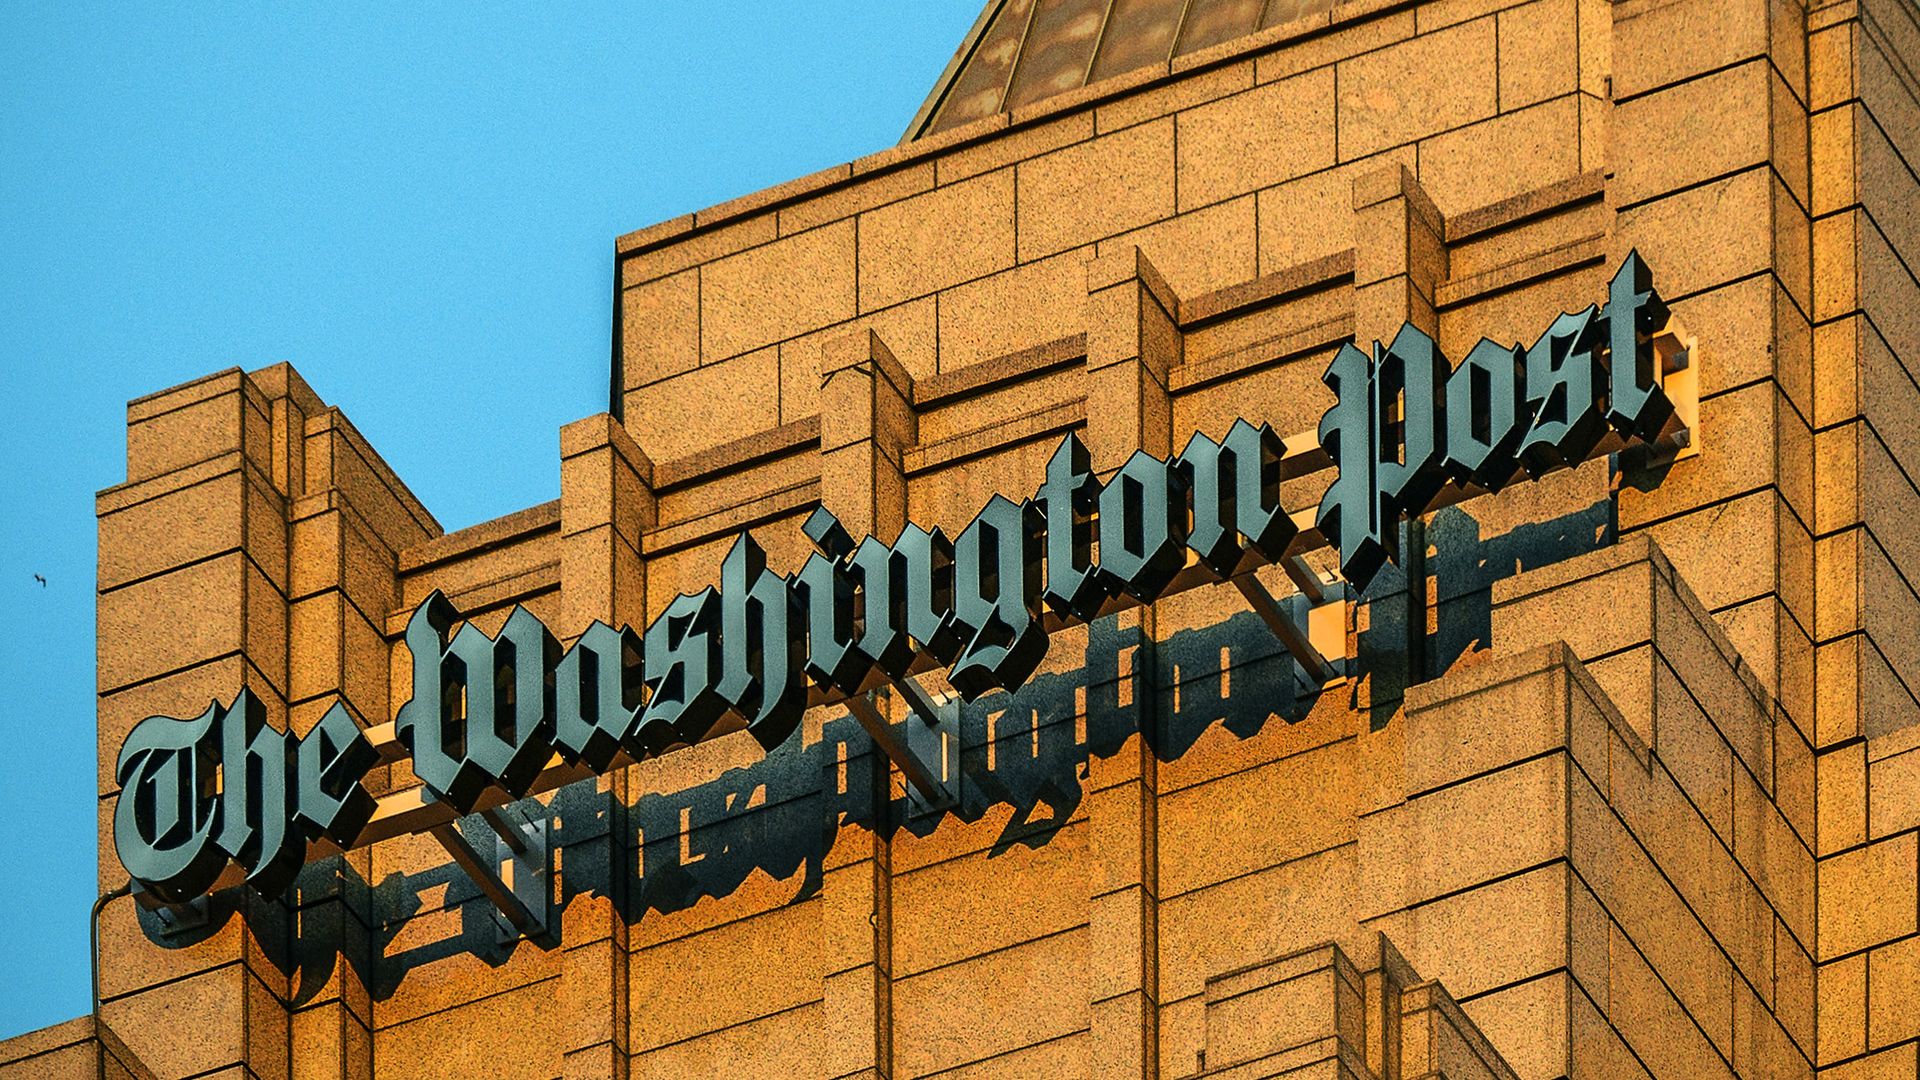 Picture of the Washington Post logo on their building